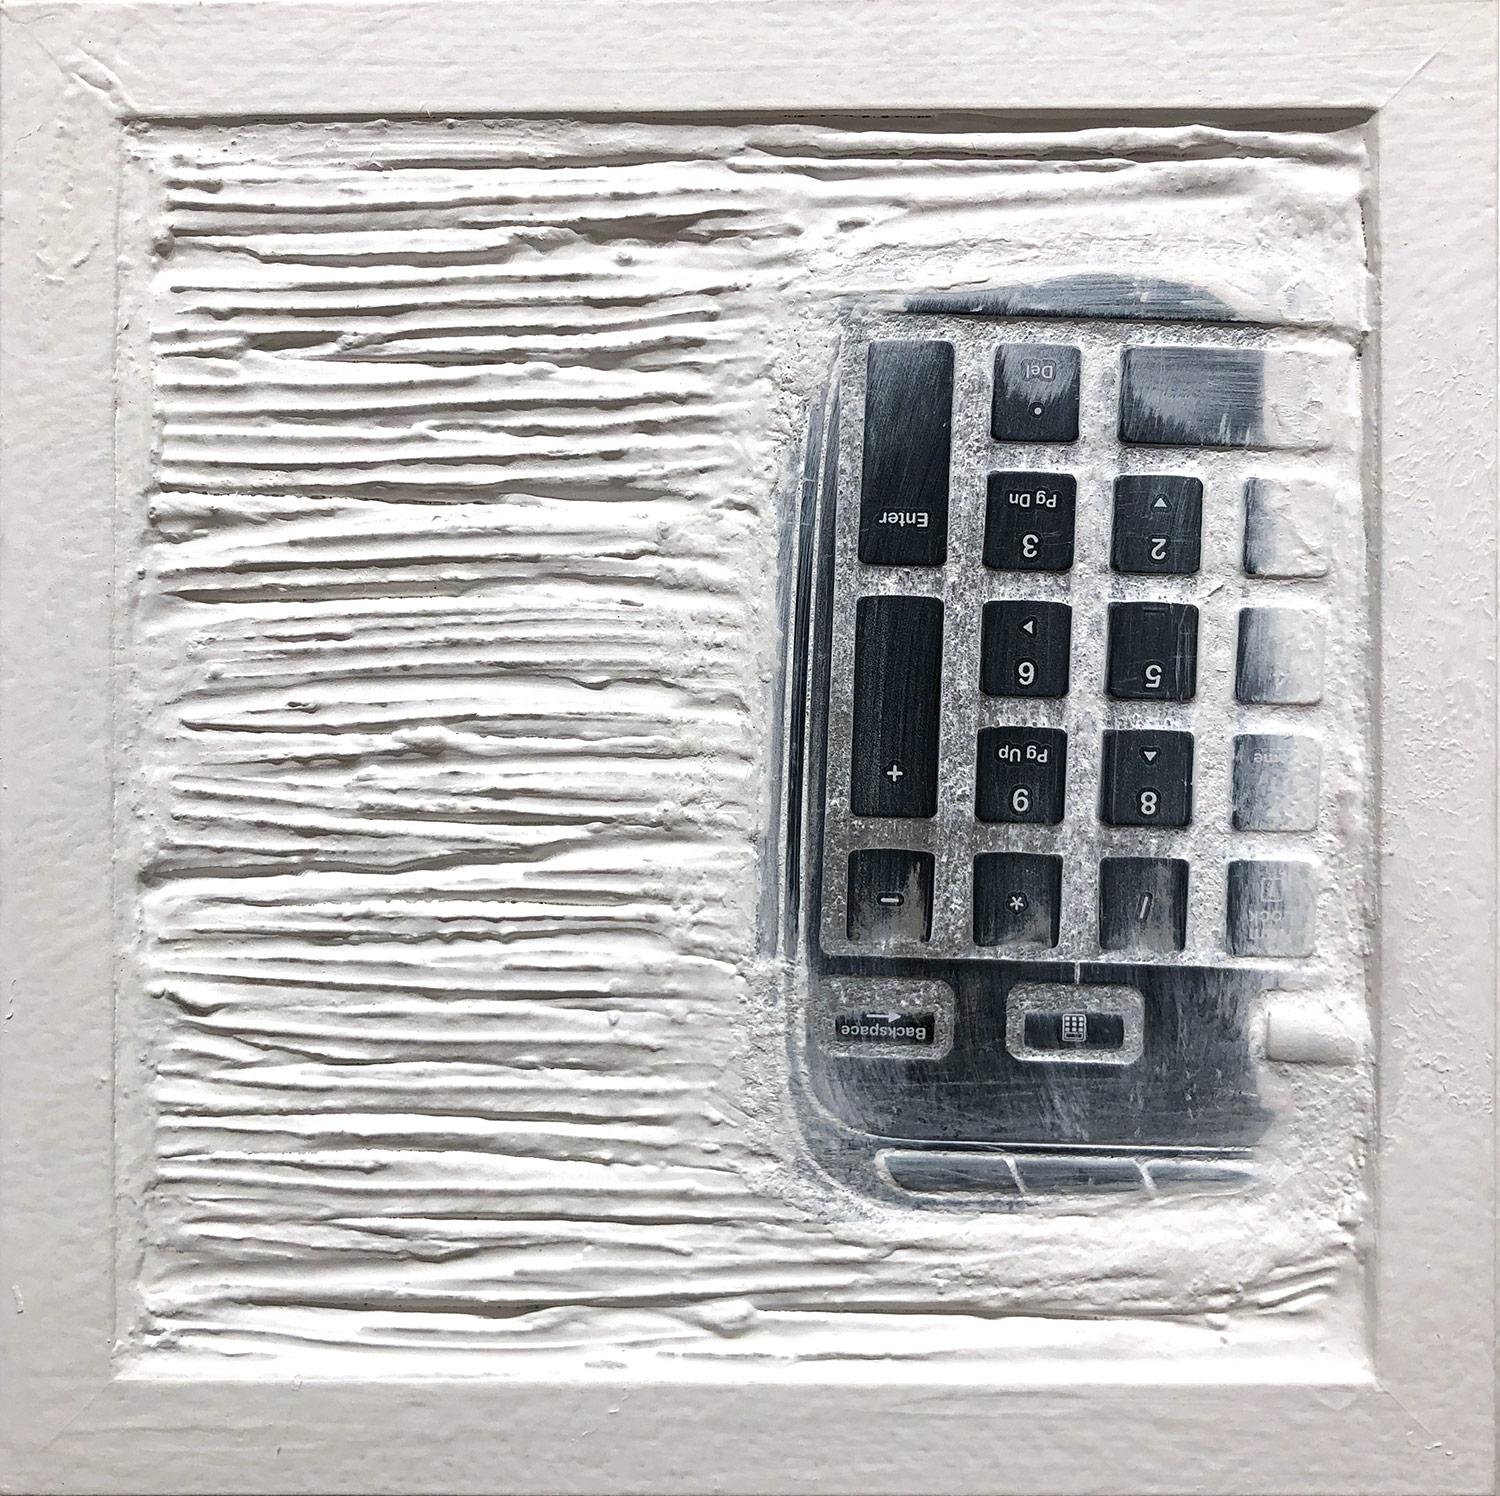 “Pen Decline 1 - 2 - 3 in White” (Archeology series) Computer Keyboard Sculpture - Painting by Daniel Fiorda